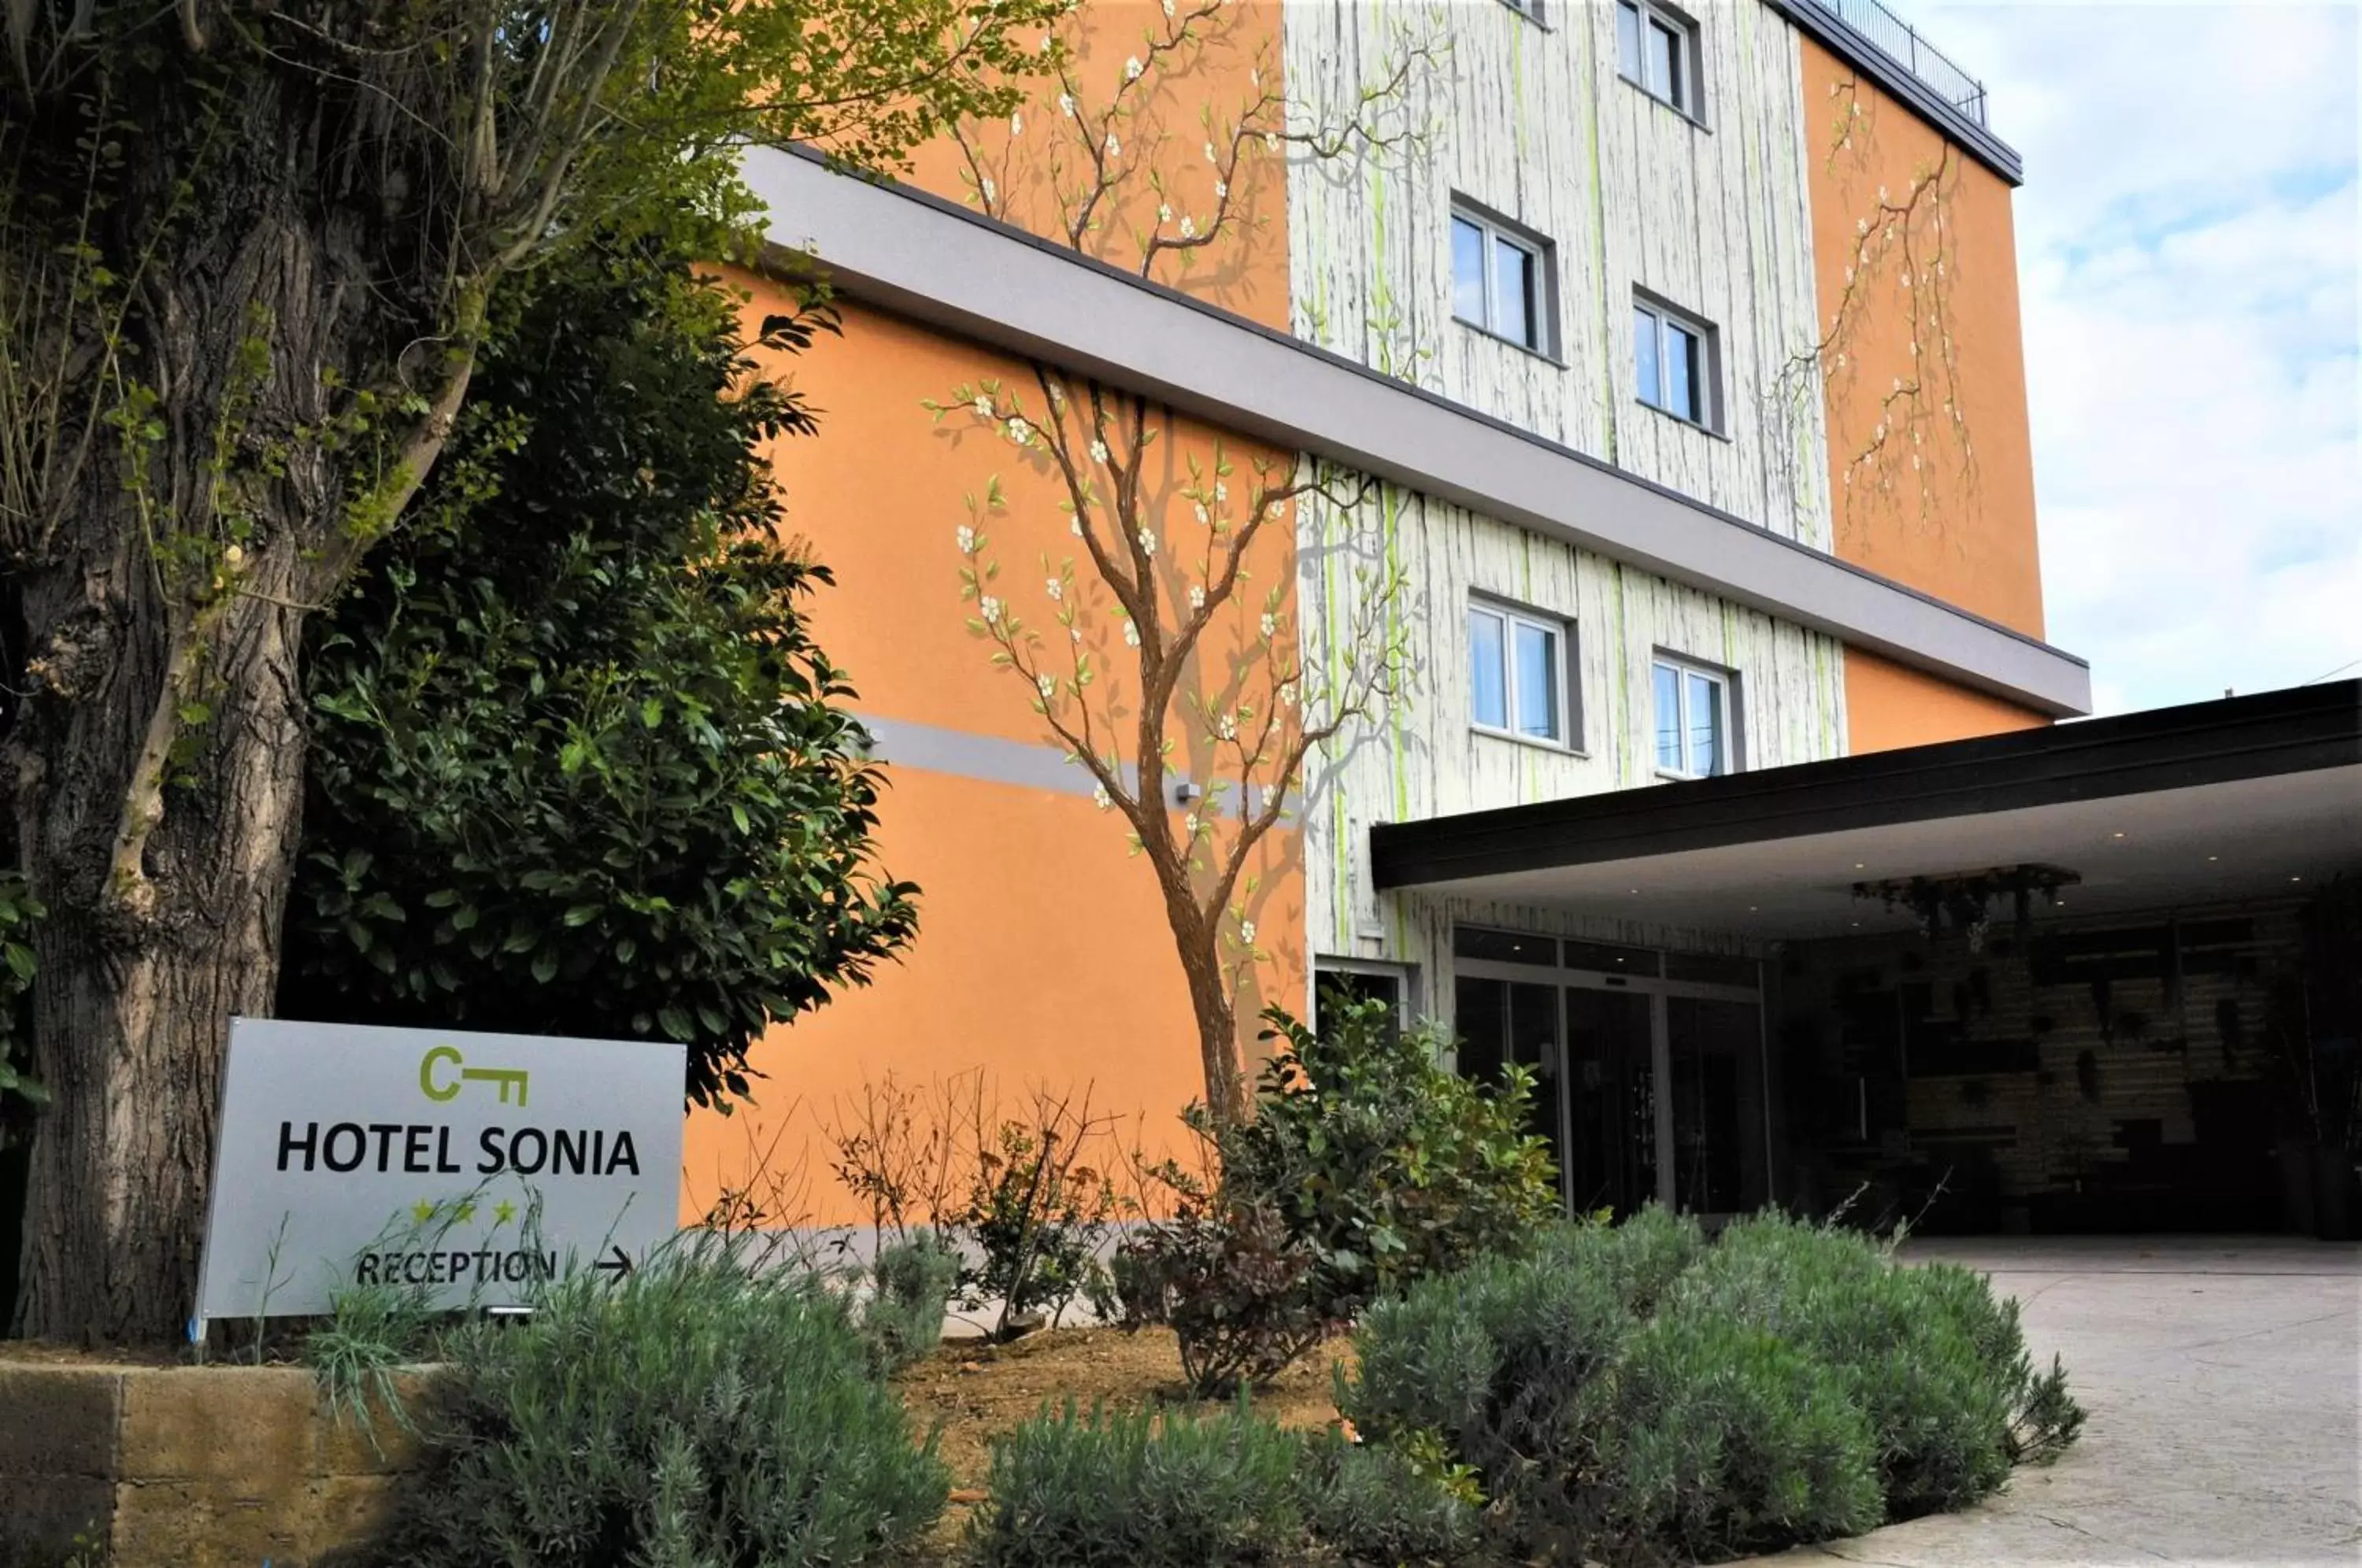 Property building in Hotel Sonia